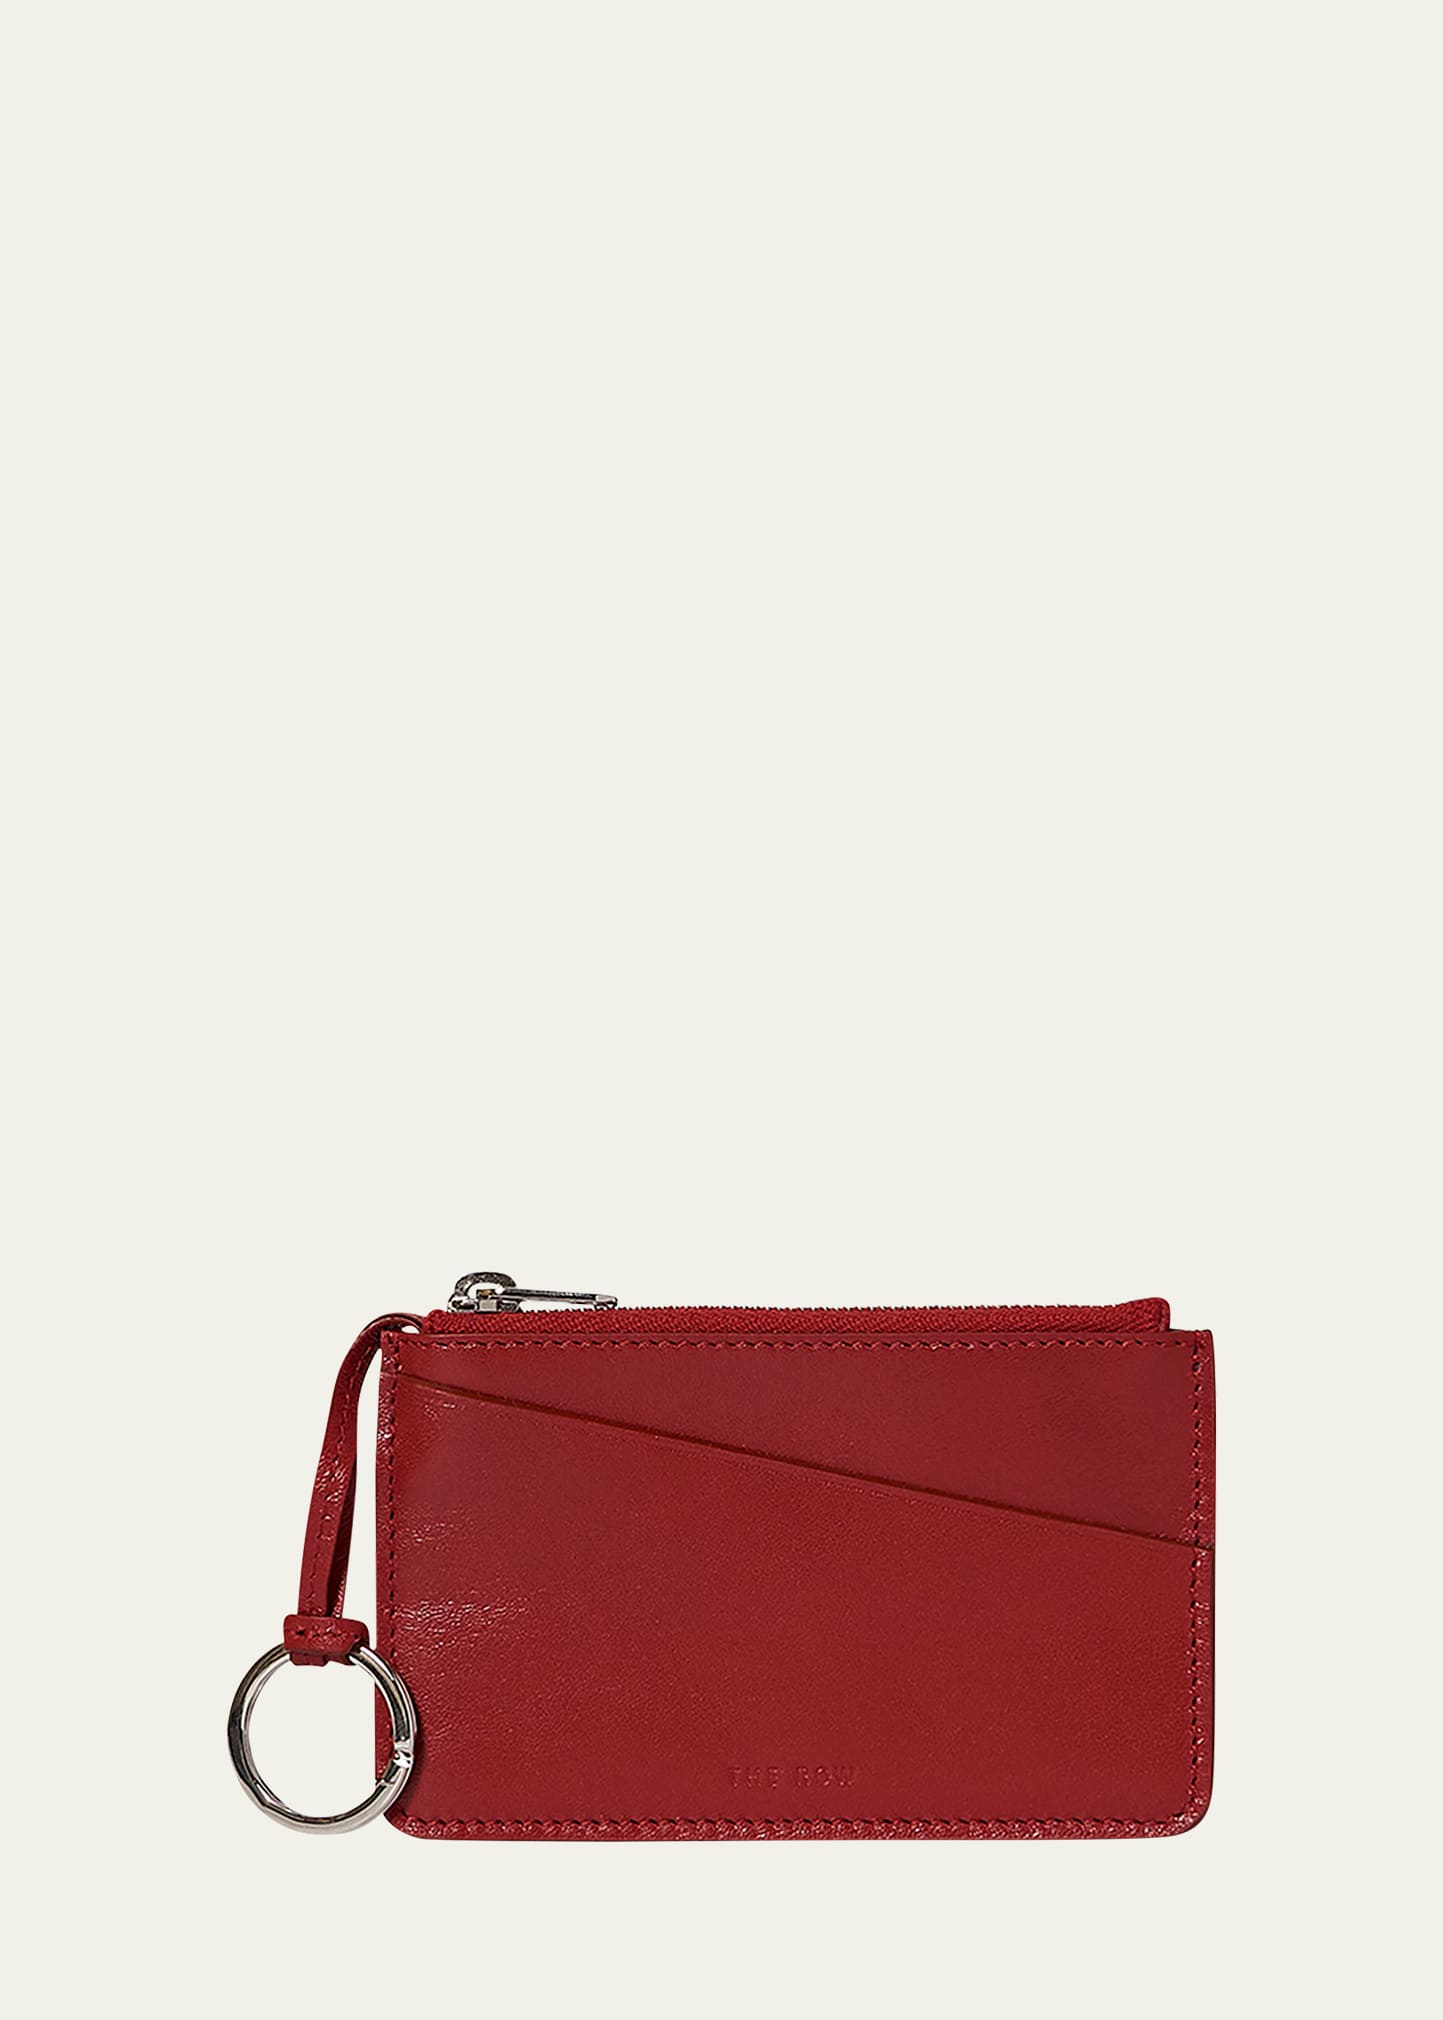 The Row Zip Wallet In Calf Leather In Clpld Chili Pld